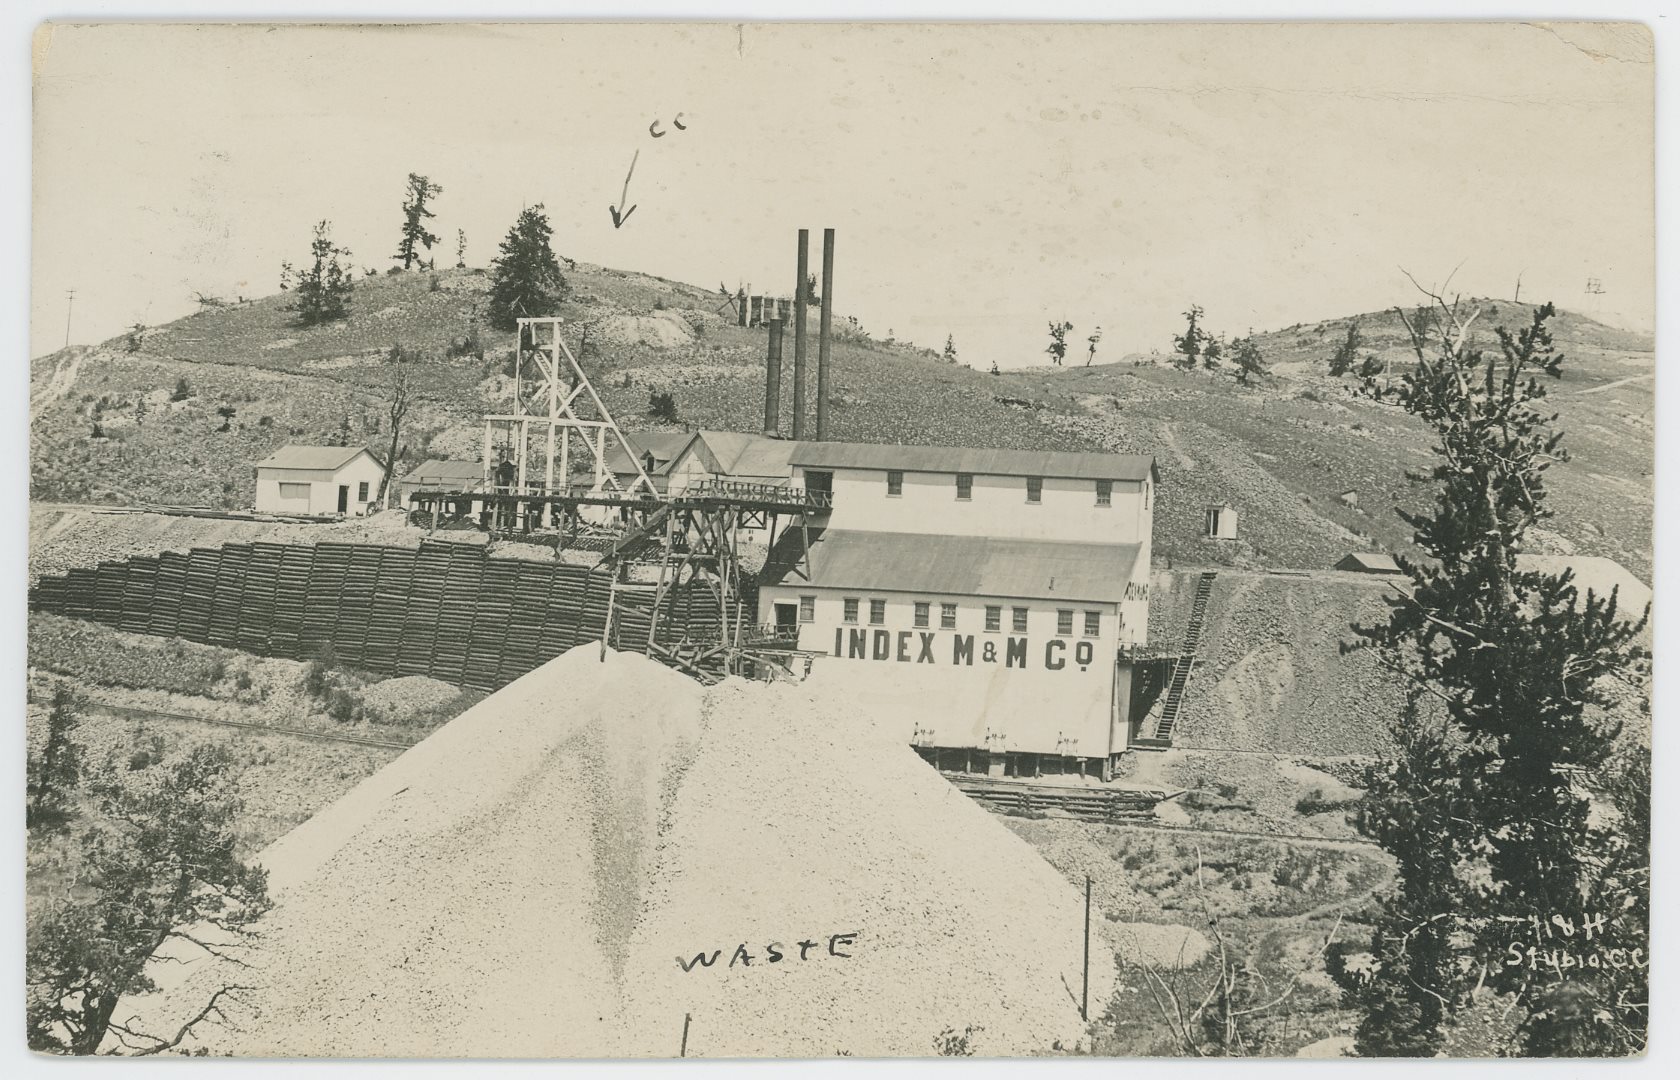 This view here of the surface structures for the Index Mining & Milling Company is a view that has some fame to it as it has been used in several postcards crop-versions and I have seen it used in one postcard folder during the timeframe from when it was taken sometime before April 1916 when this postcard was mailed. From one of the other postcards I've seen the stamp box has a look that dates it around 1910.
   In regard to the view itself; I personally love it as it shows the former Mint mine on Gold Hill in all its glory! This  mine was connected to the Low Line/Short Line branch through a spur that might have been meant to go all the way up to a connection at the Anchoria-Leland mine, seen a map that even drew the rails all the way but as far as I know it only came to be a roadbed without rails, with rails only at each end serving the mines there. This mine had its connection down along the Low Line at the so-called Alamo Junction, about halfway between Cripple Creek and Anaconda, named so from the nearby Alamo mine, which never really grew big...